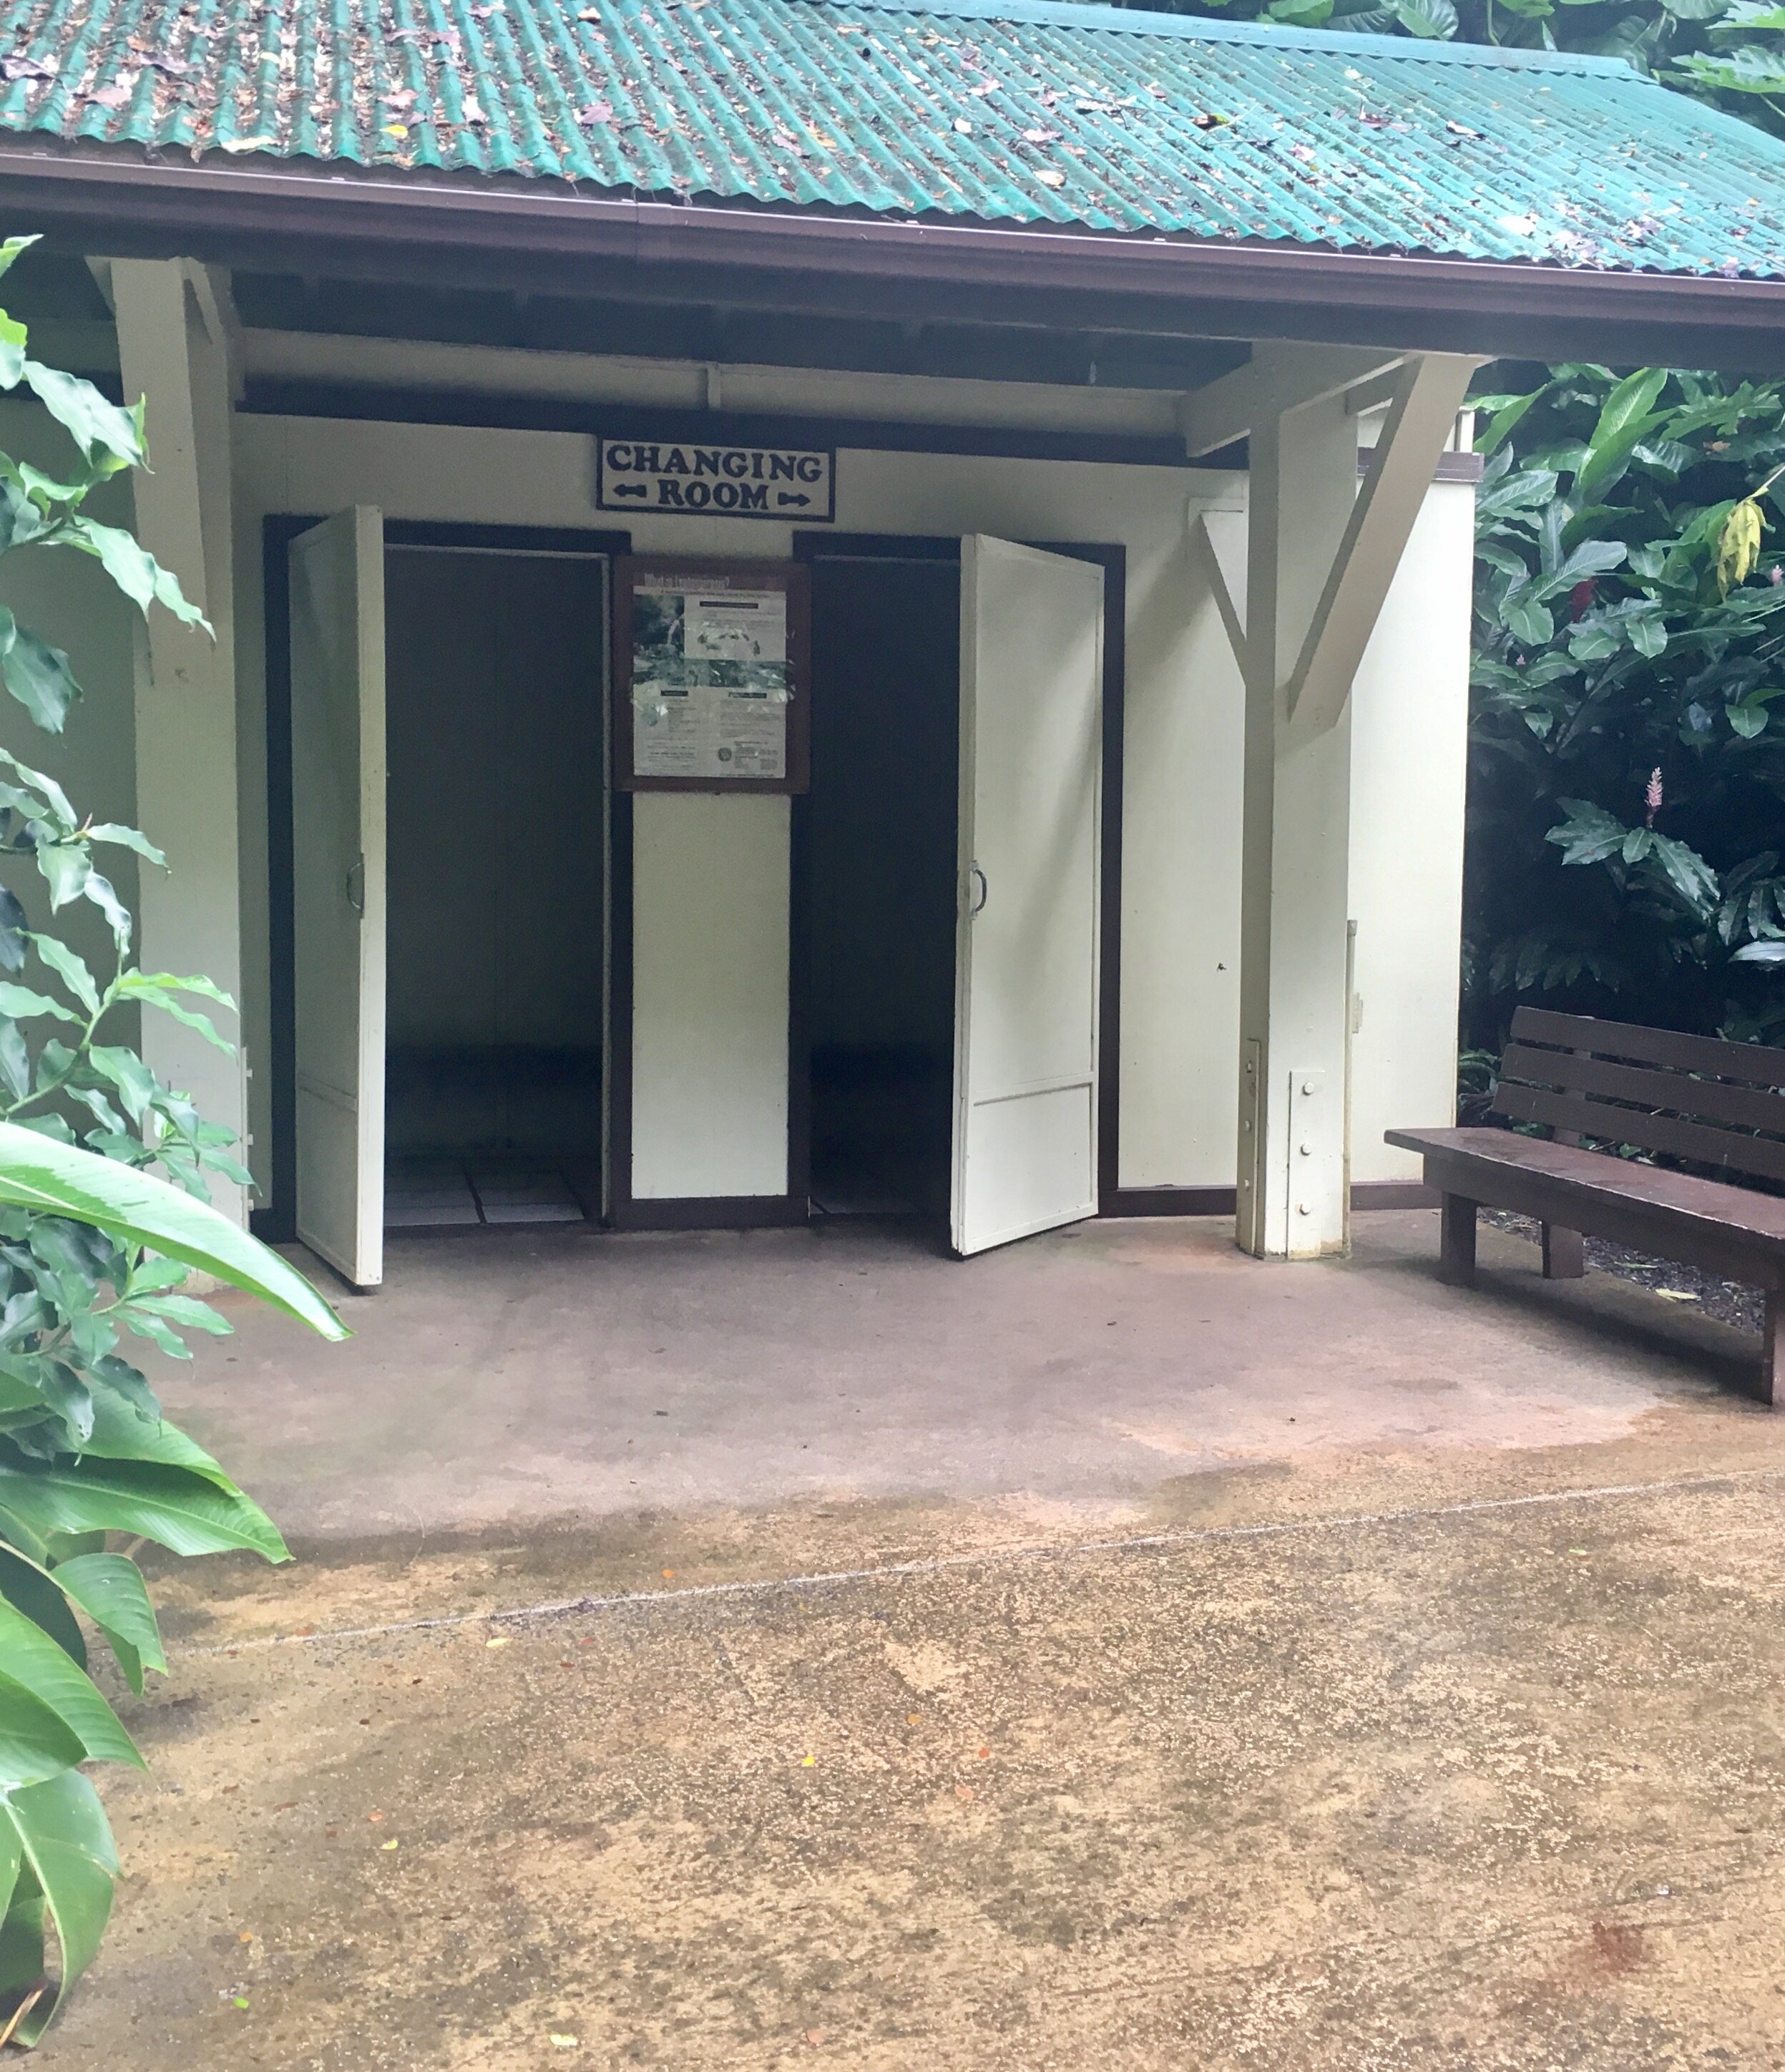 Waimea Valley is a great place for the entire family. Visit shortsweetmom.com for some tips before your visit or pin for later. 